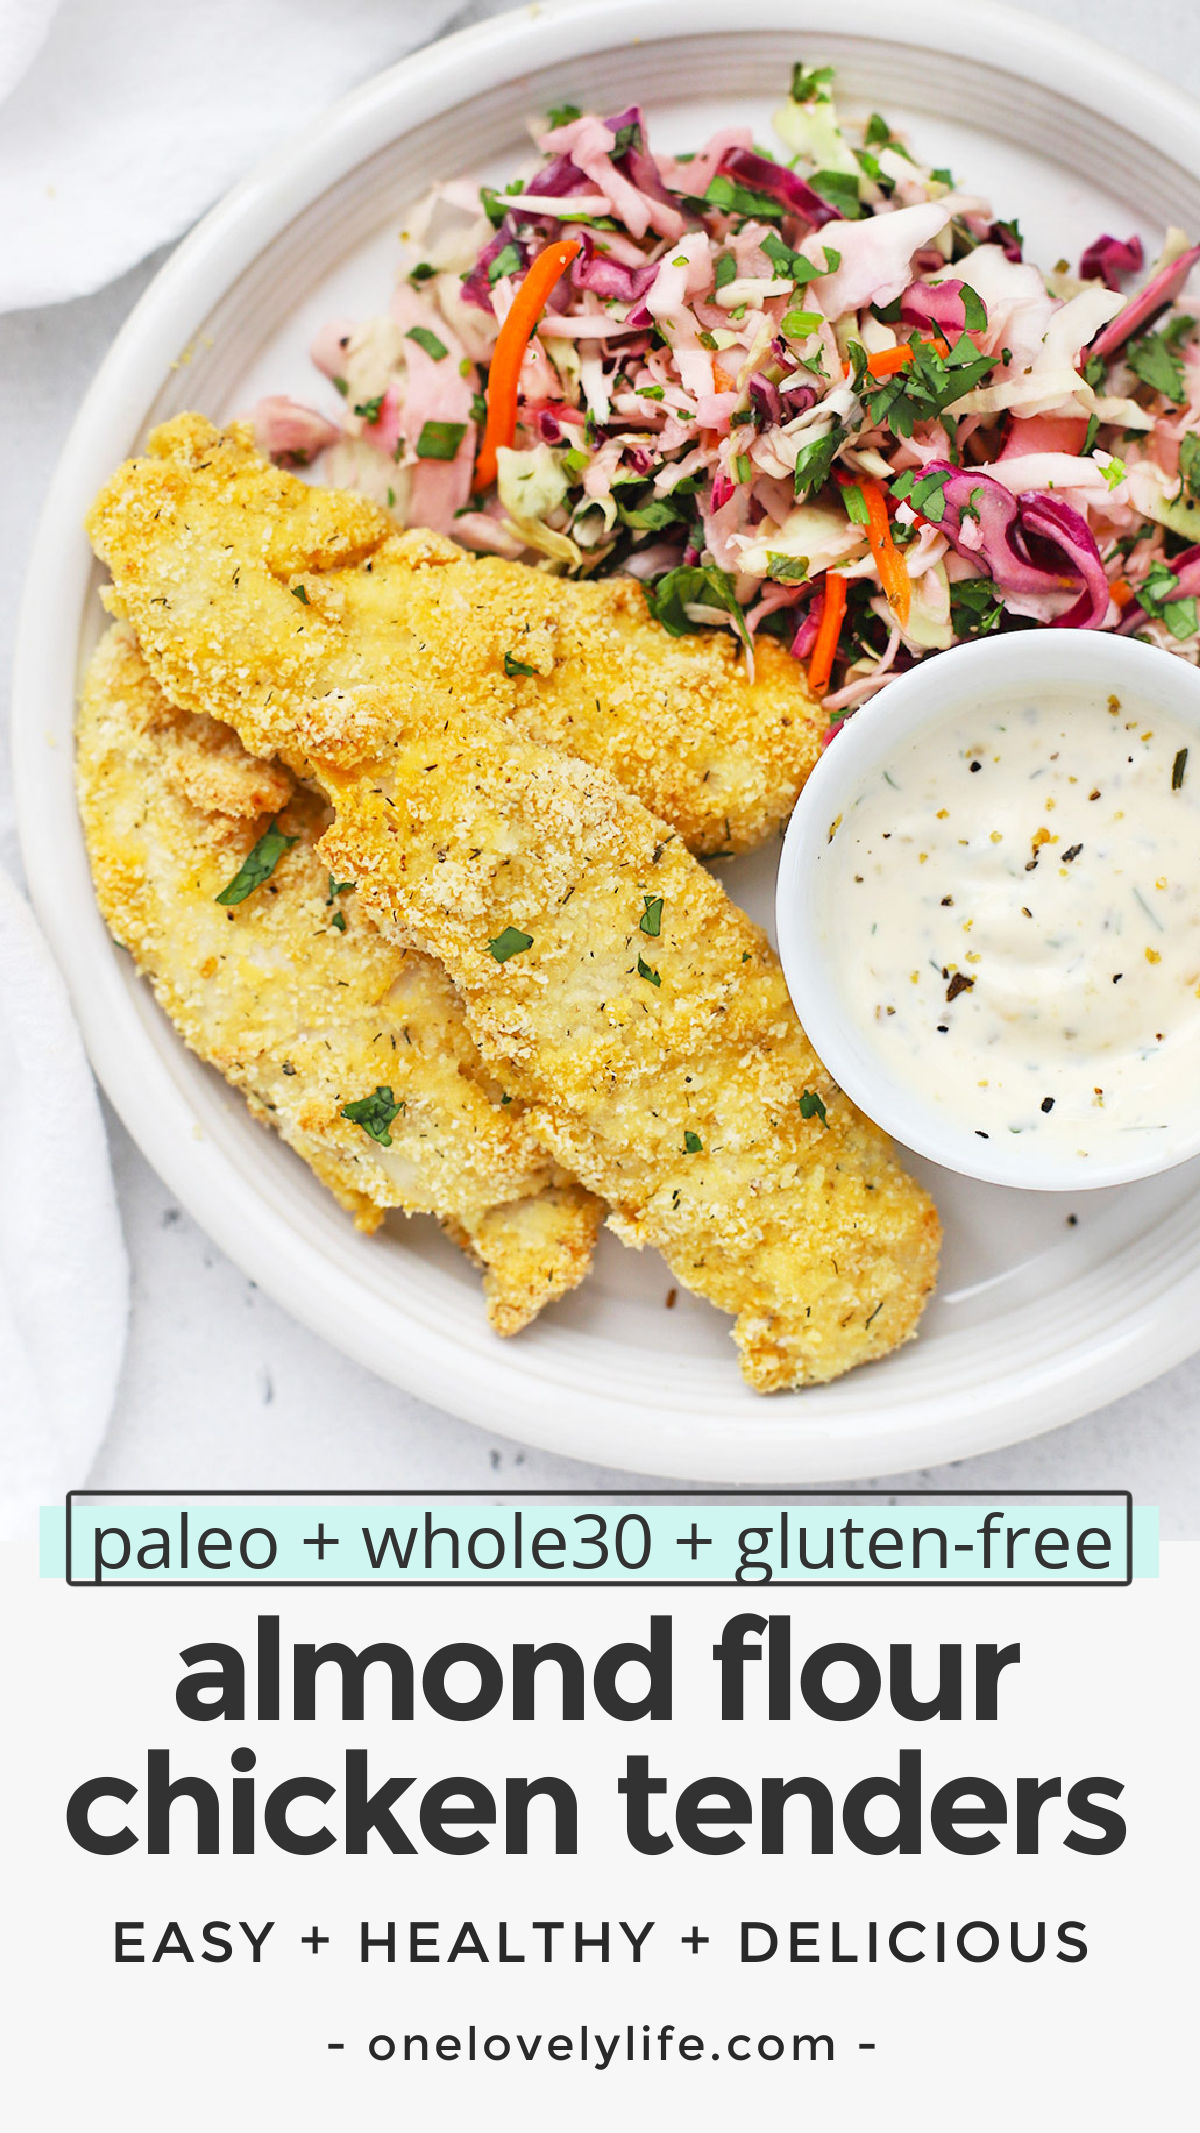 Almond Flour Chicken Tenders - These healthy chicken tenders are breaded with seasoned almond flour and cooked to perfection. Enjoy them on their own, or try them with one of our dipping sauces below! (Paleo, Whole30, Gluten-Free) // Paleo Chicken Tenders // Whole30 Chicken Tenders // Crispy Chicken Tenders // Gluten Free Chicken Tenders // Paleo dinner // Whole30 dinner